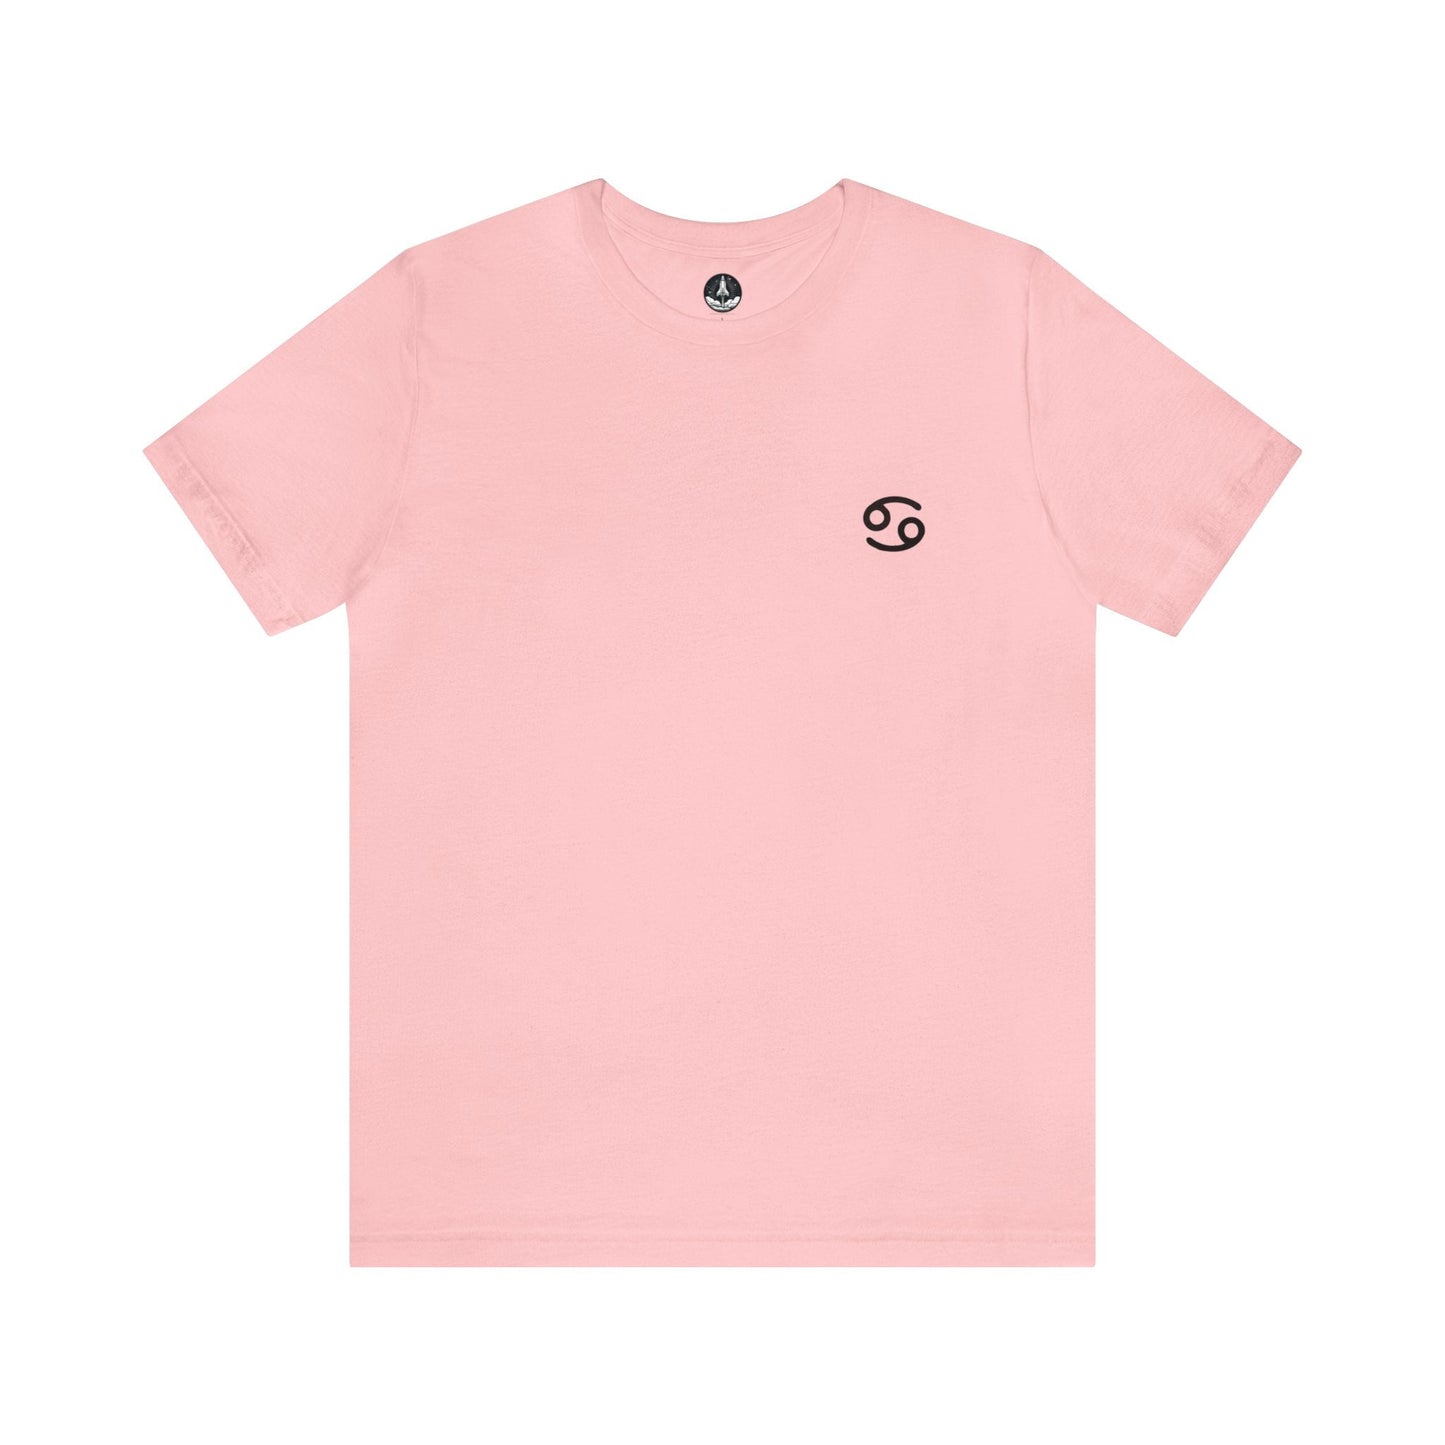 T-Shirt Pink / S Cancer Zodiac Crest T-Shirt: Comfort and Intuition for the Moonchild